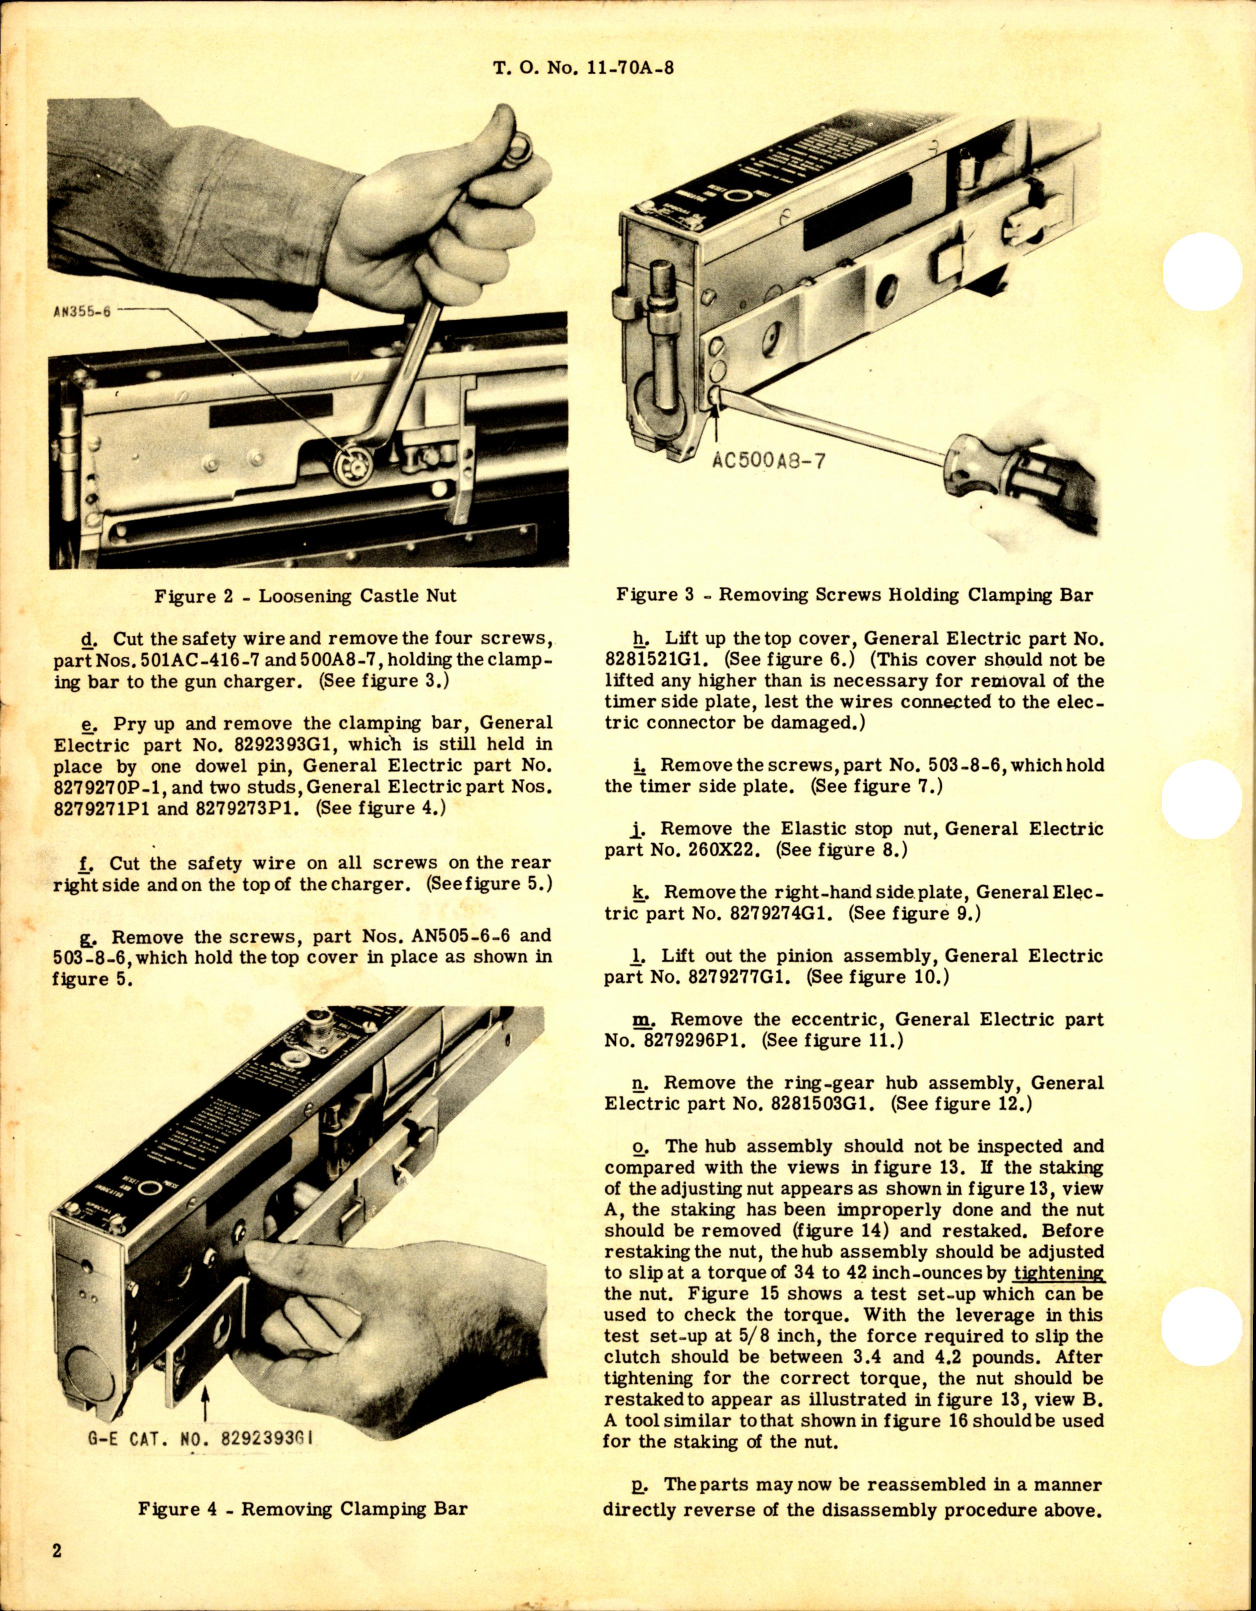 Sample page 2 from AirCorps Library document: Repair of Automatic Gun Charger - General Electric No. 8252911G1